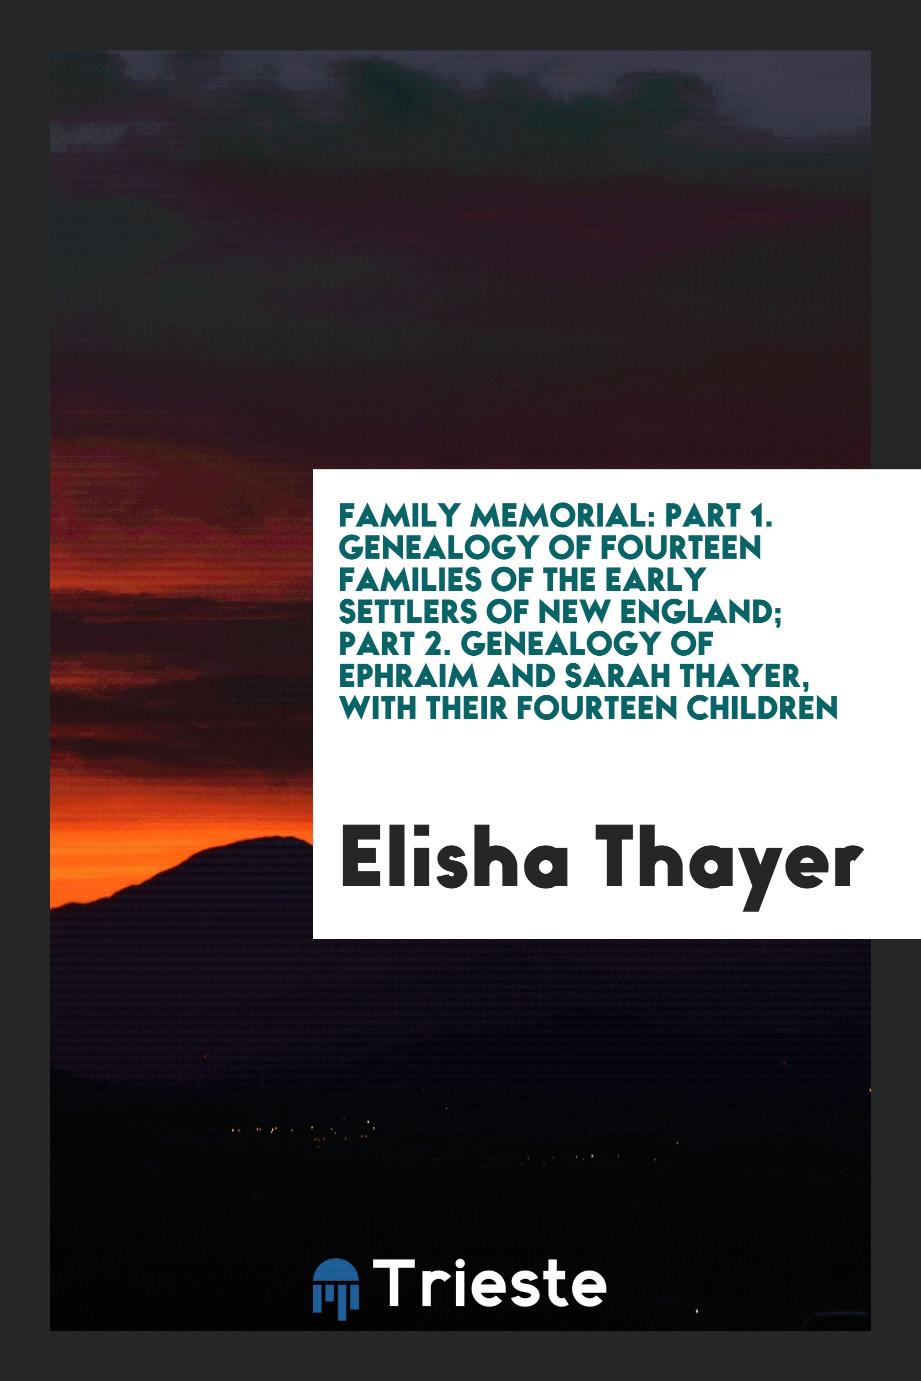 Family Memorial: Part 1. Genealogy of Fourteen Families of the Early Settlers of New England; Part 2. Genealogy of Ephraim and Sarah Thayer, with Their Fourteen Children